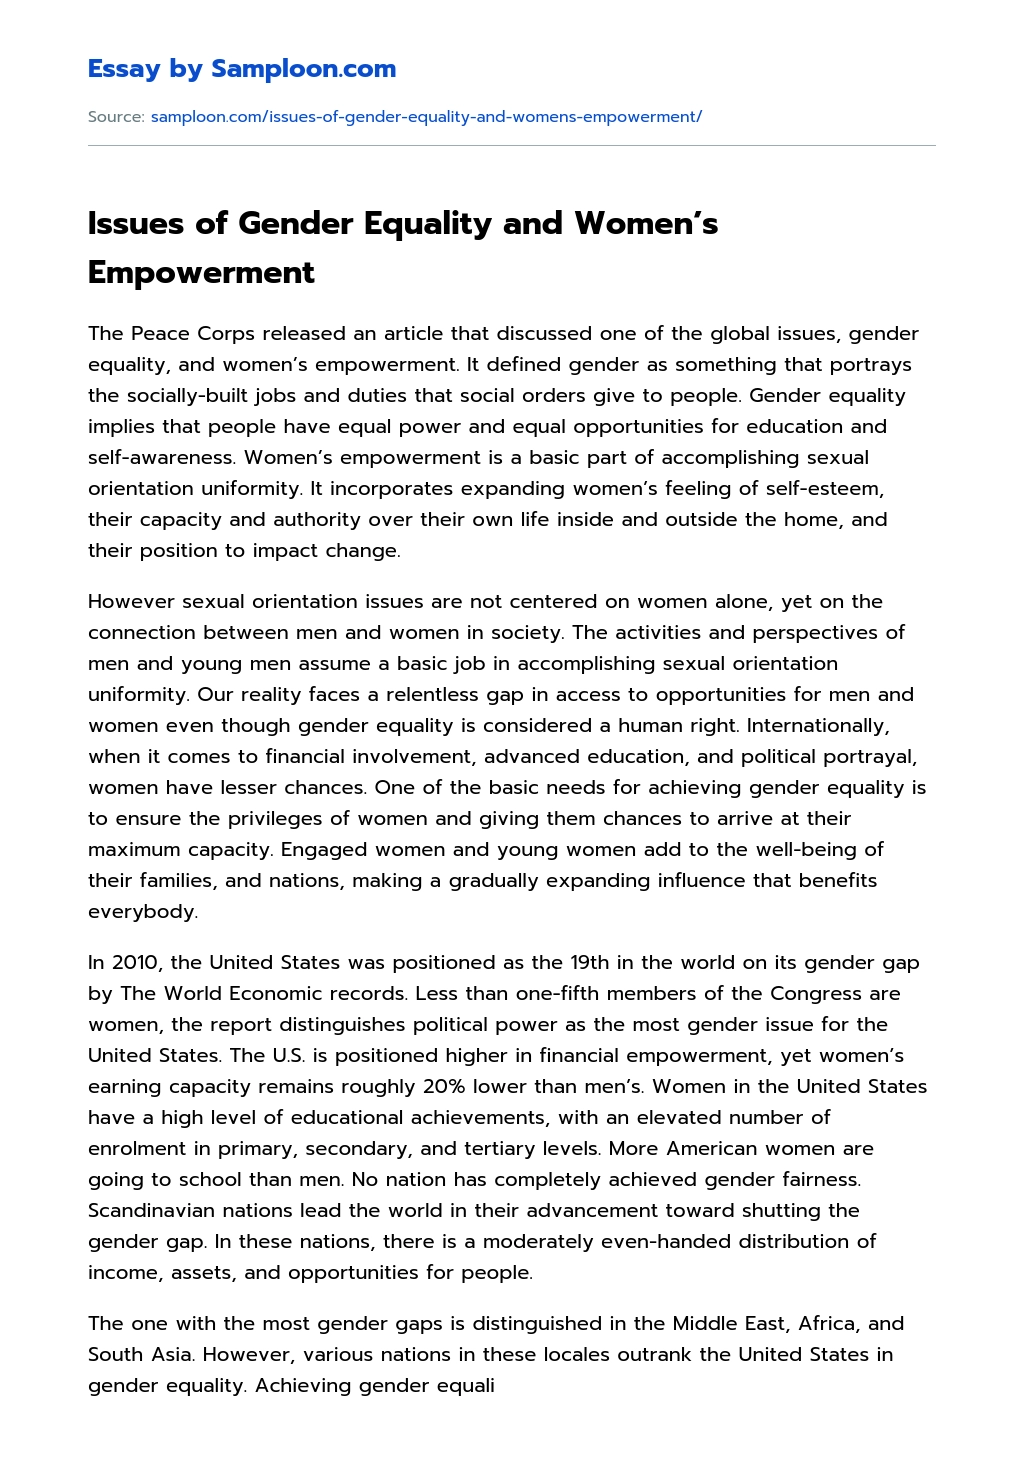 Issues of Gender Equality and Women’s Empowerment essay